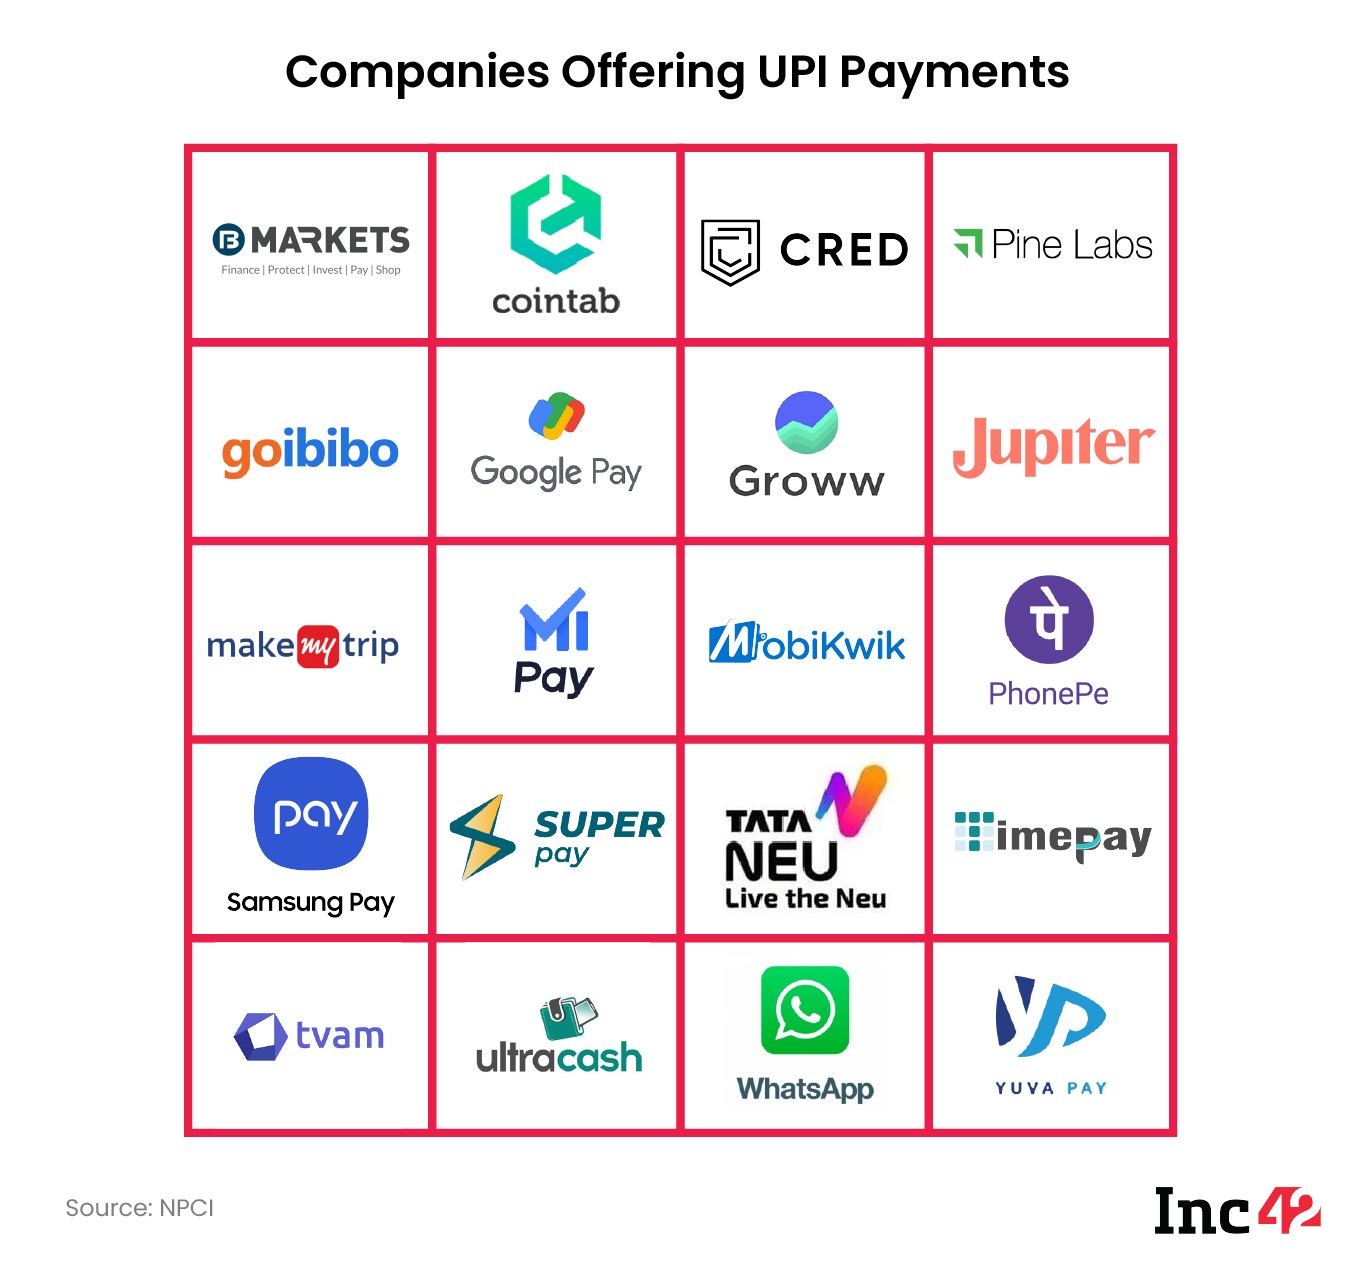 Companies offering UPI payments